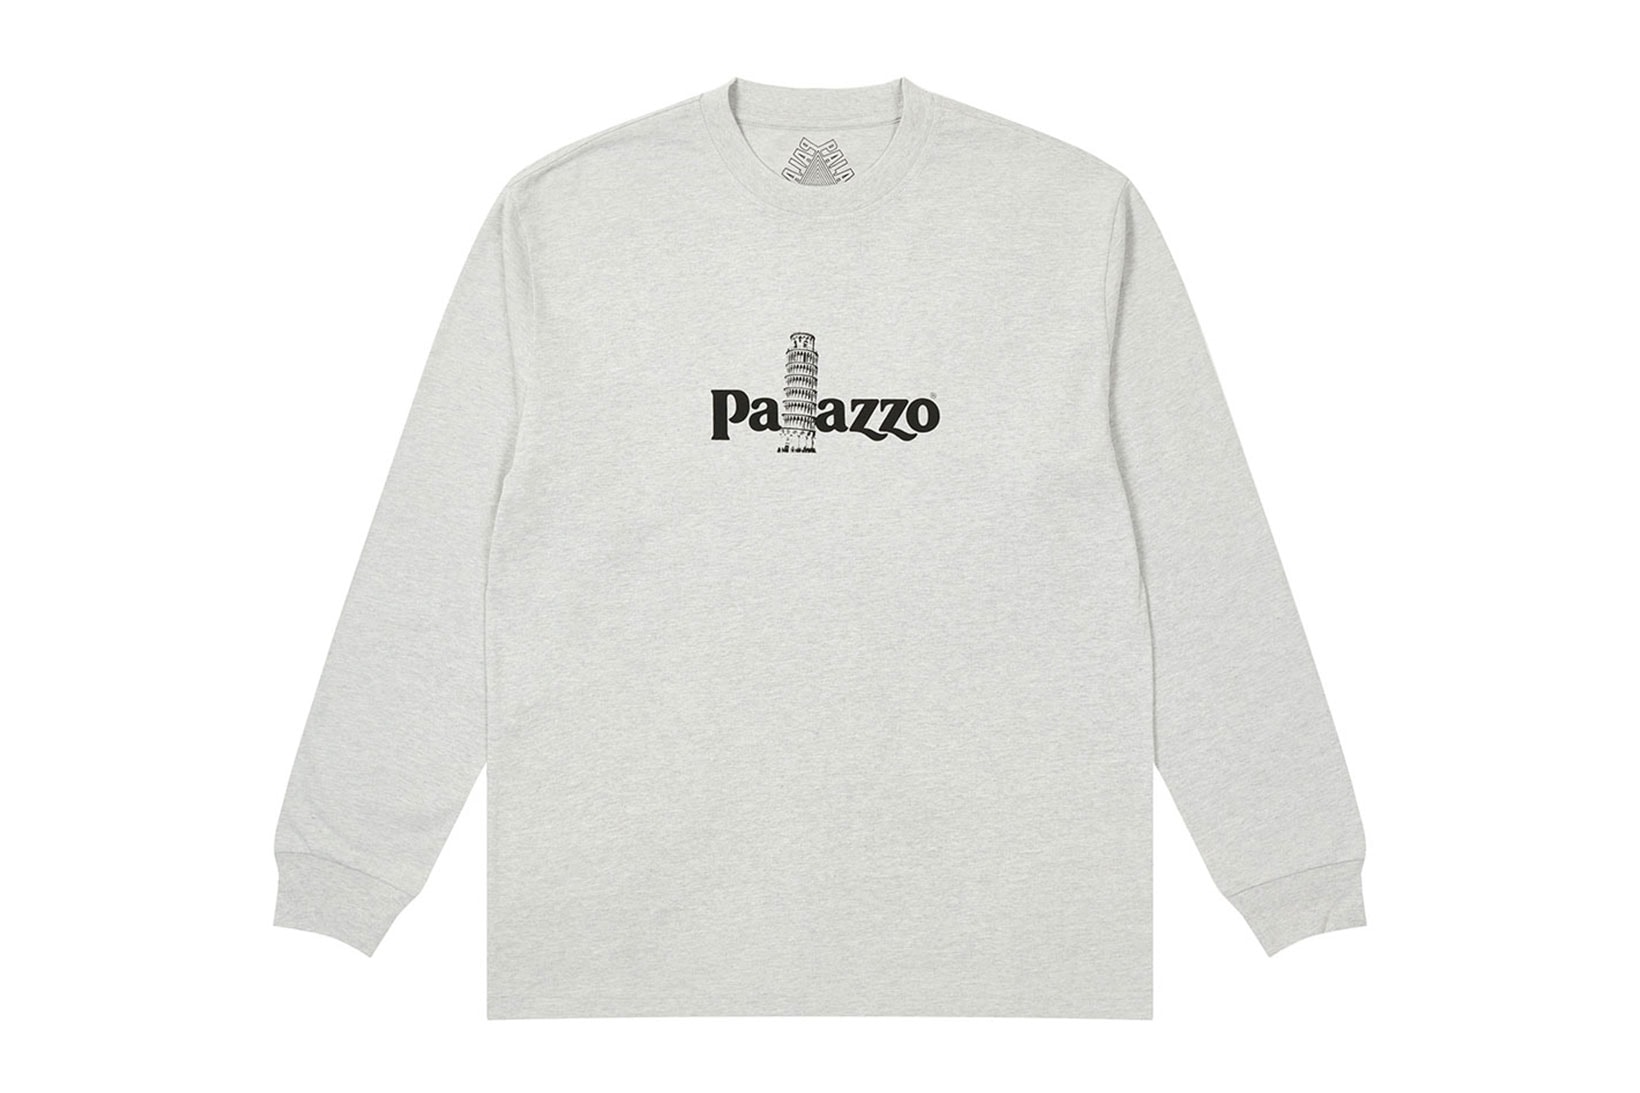 palace spring drop 4 collection sweatshirt palazzo leaning tower of pisa gray